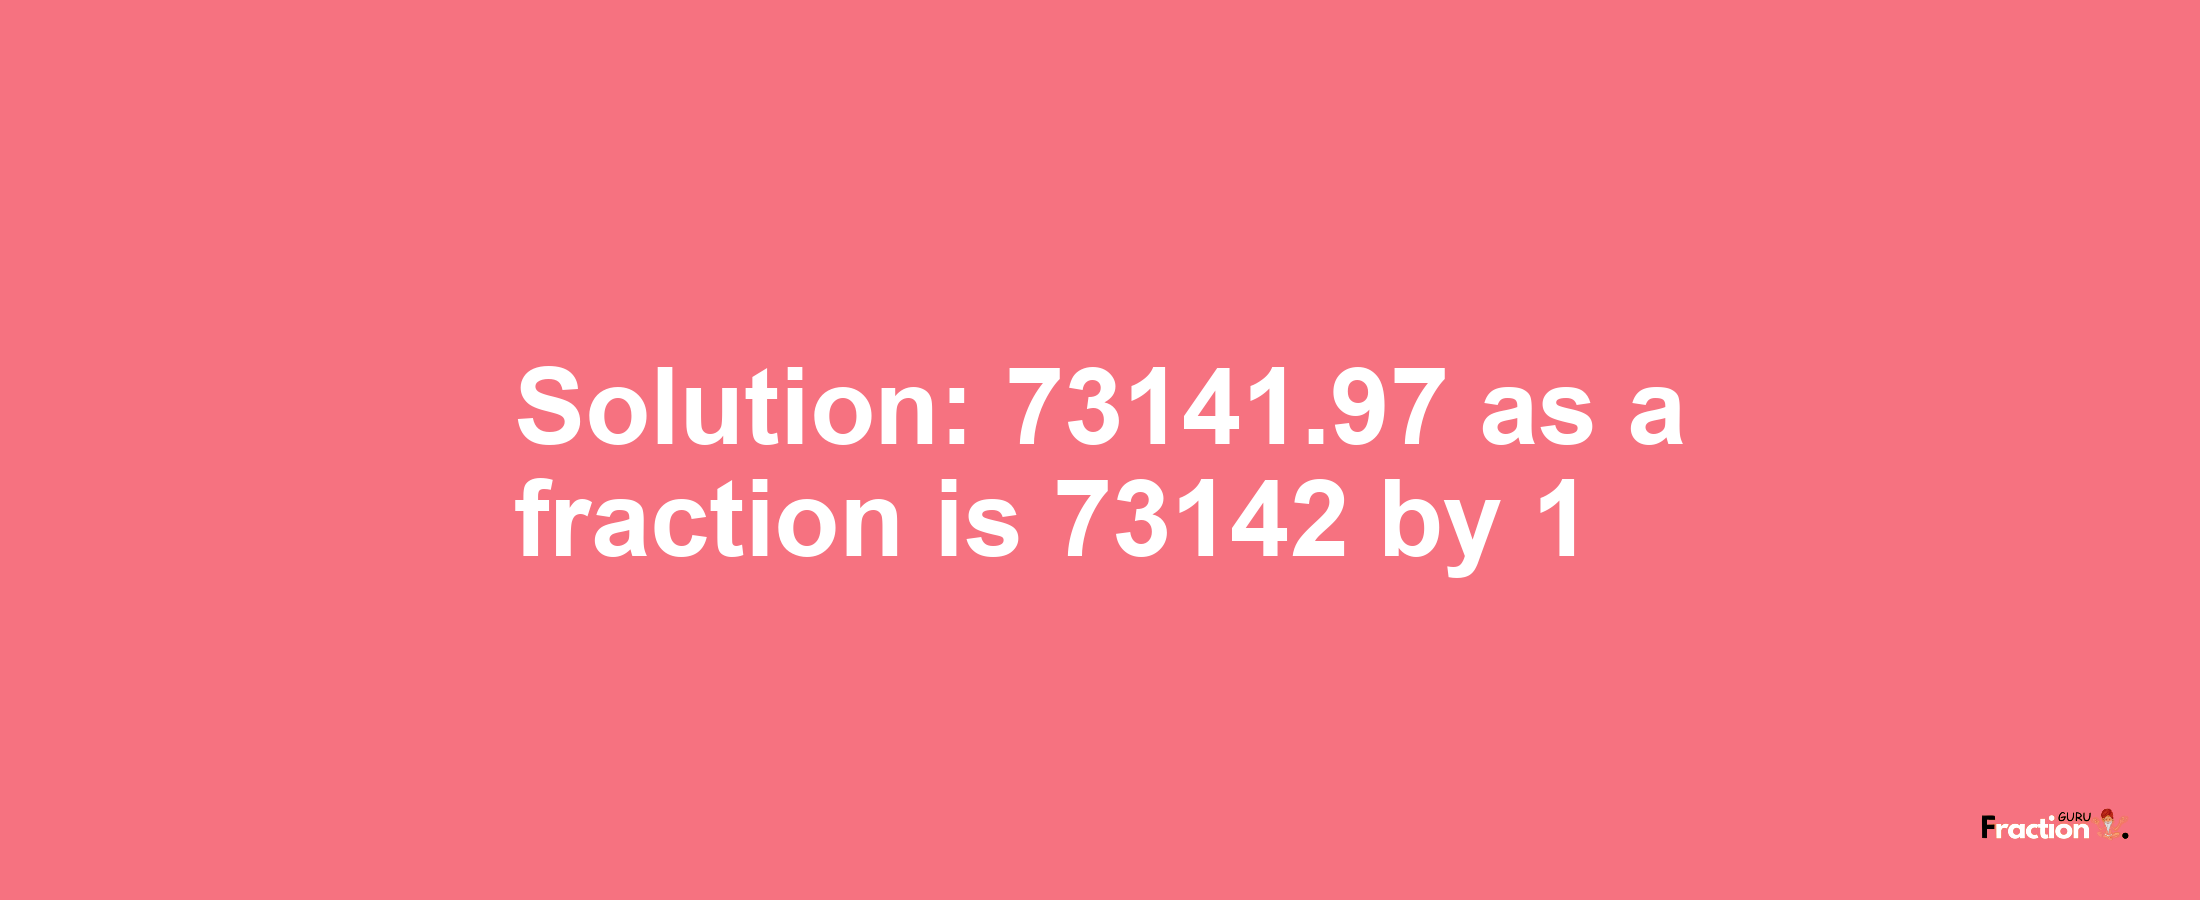 Solution:73141.97 as a fraction is 73142/1